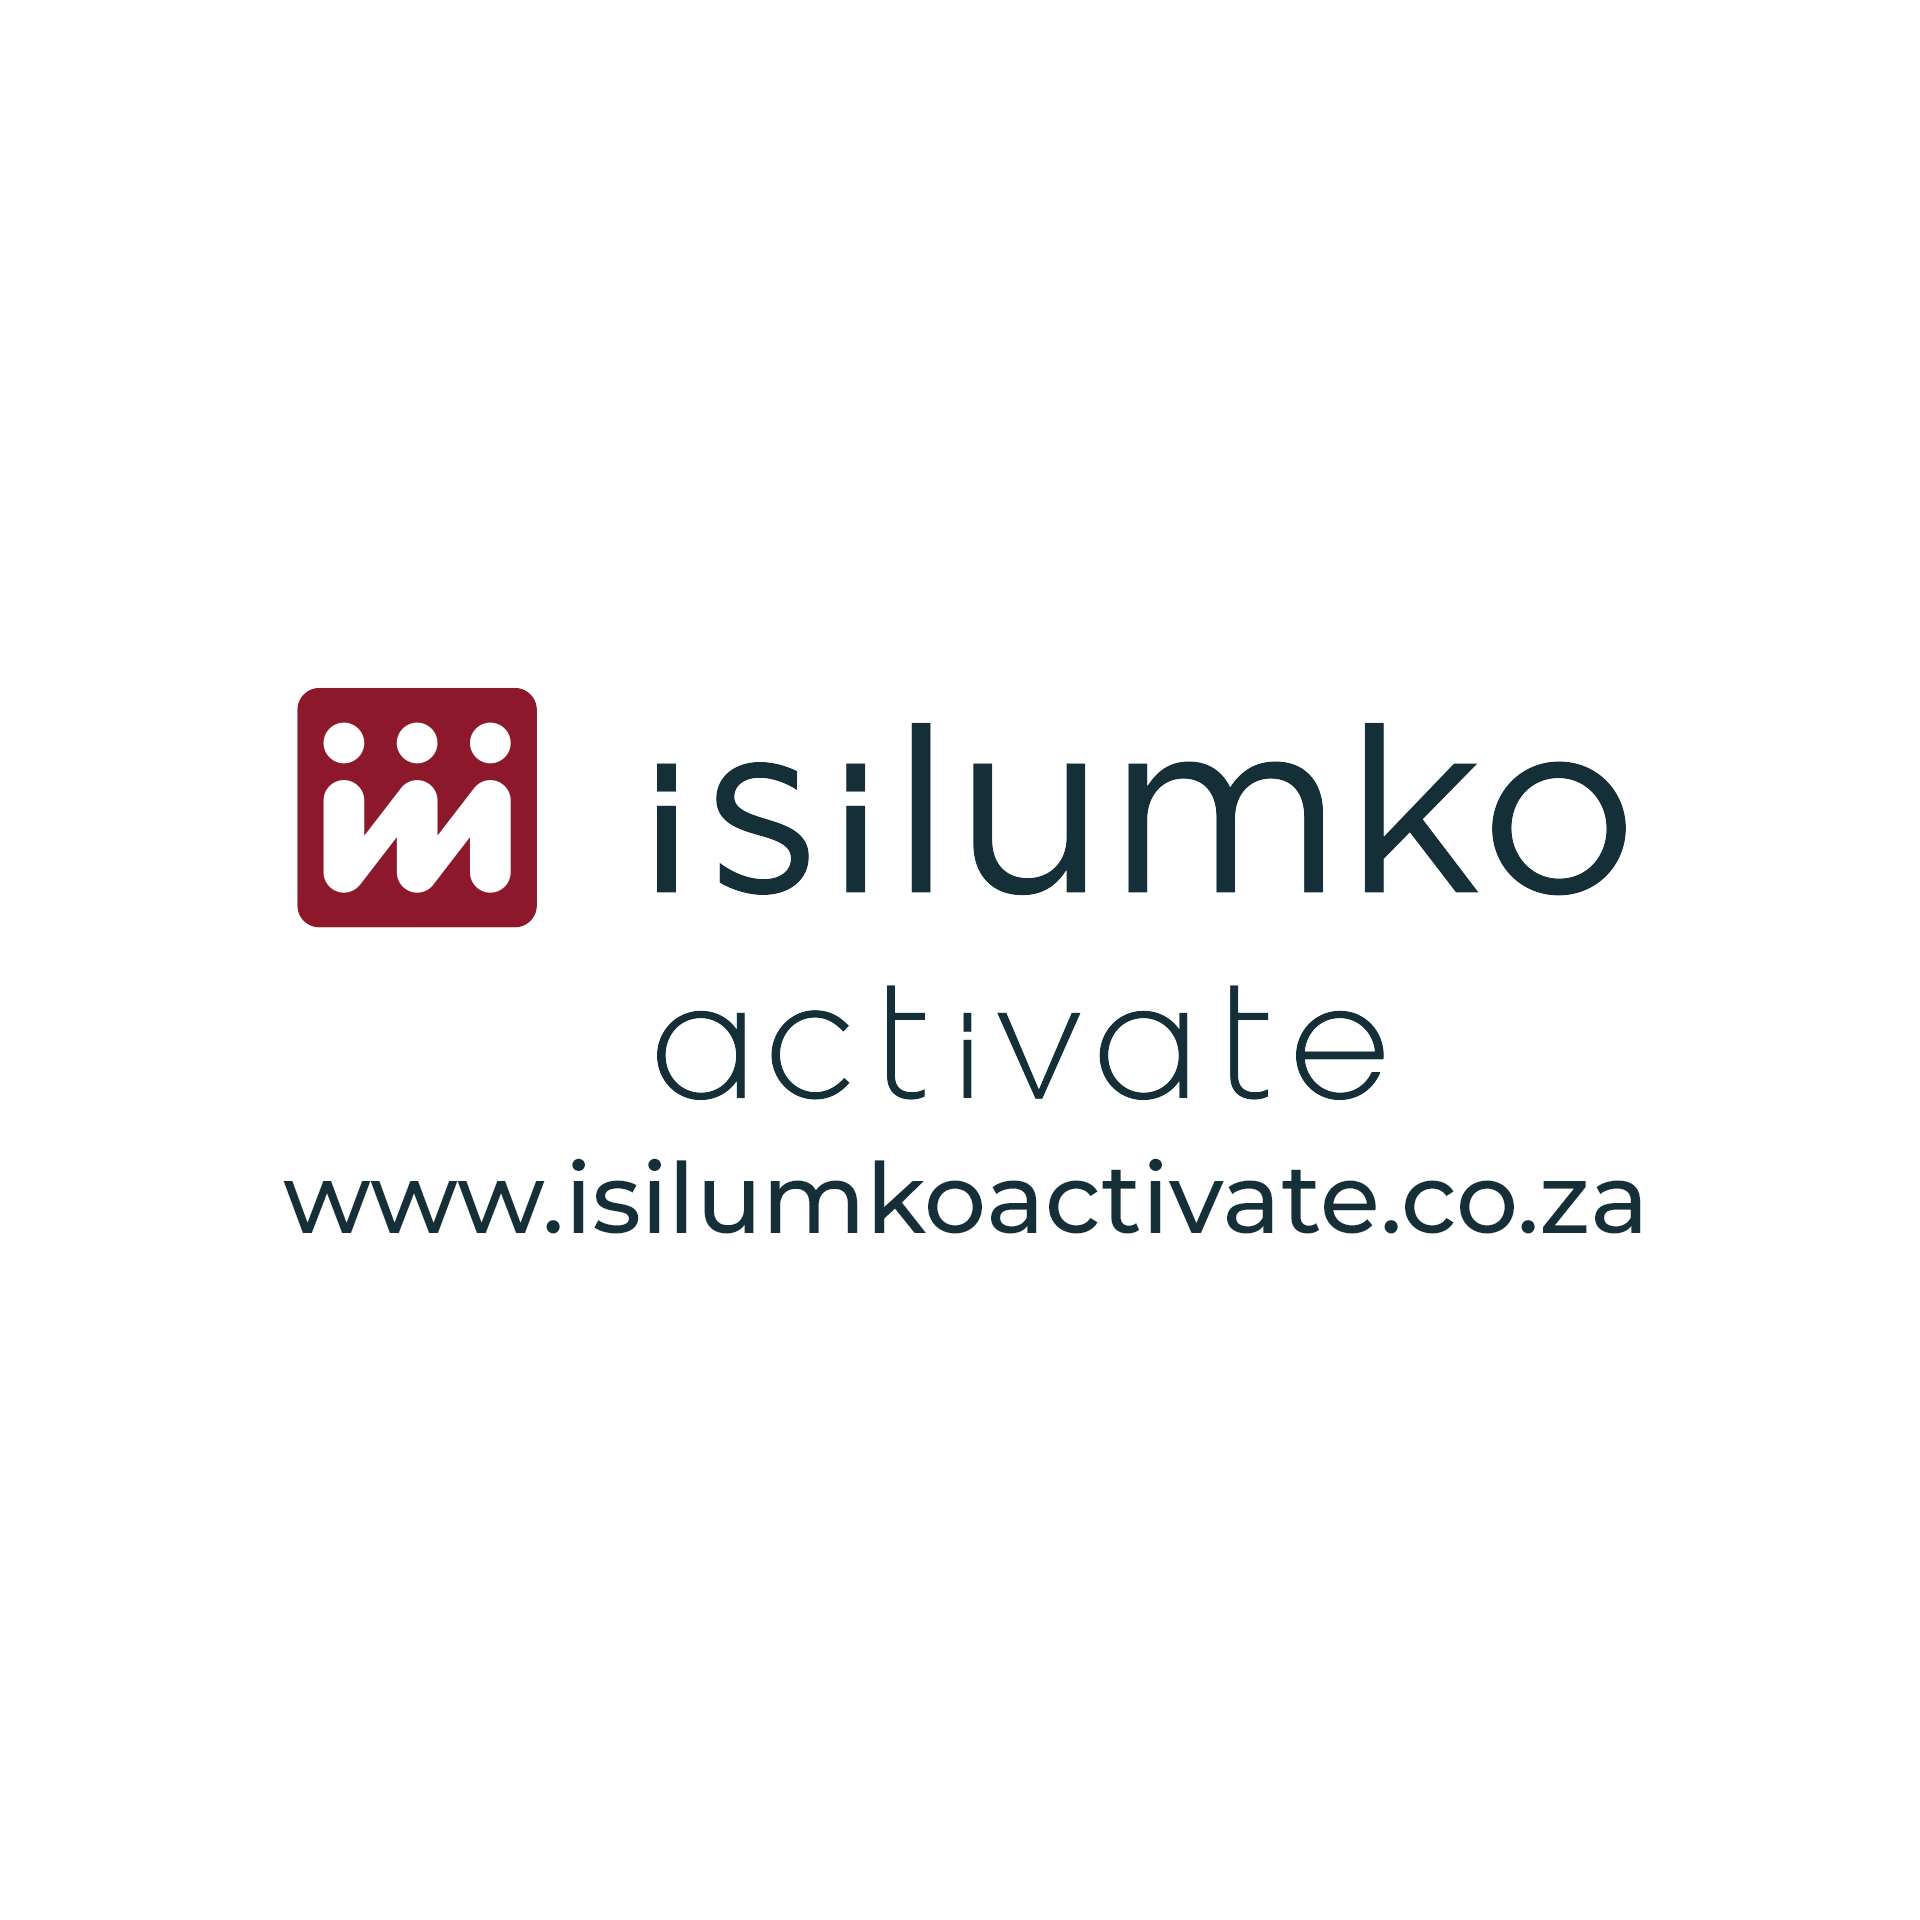 promotional companies in Johannesburg